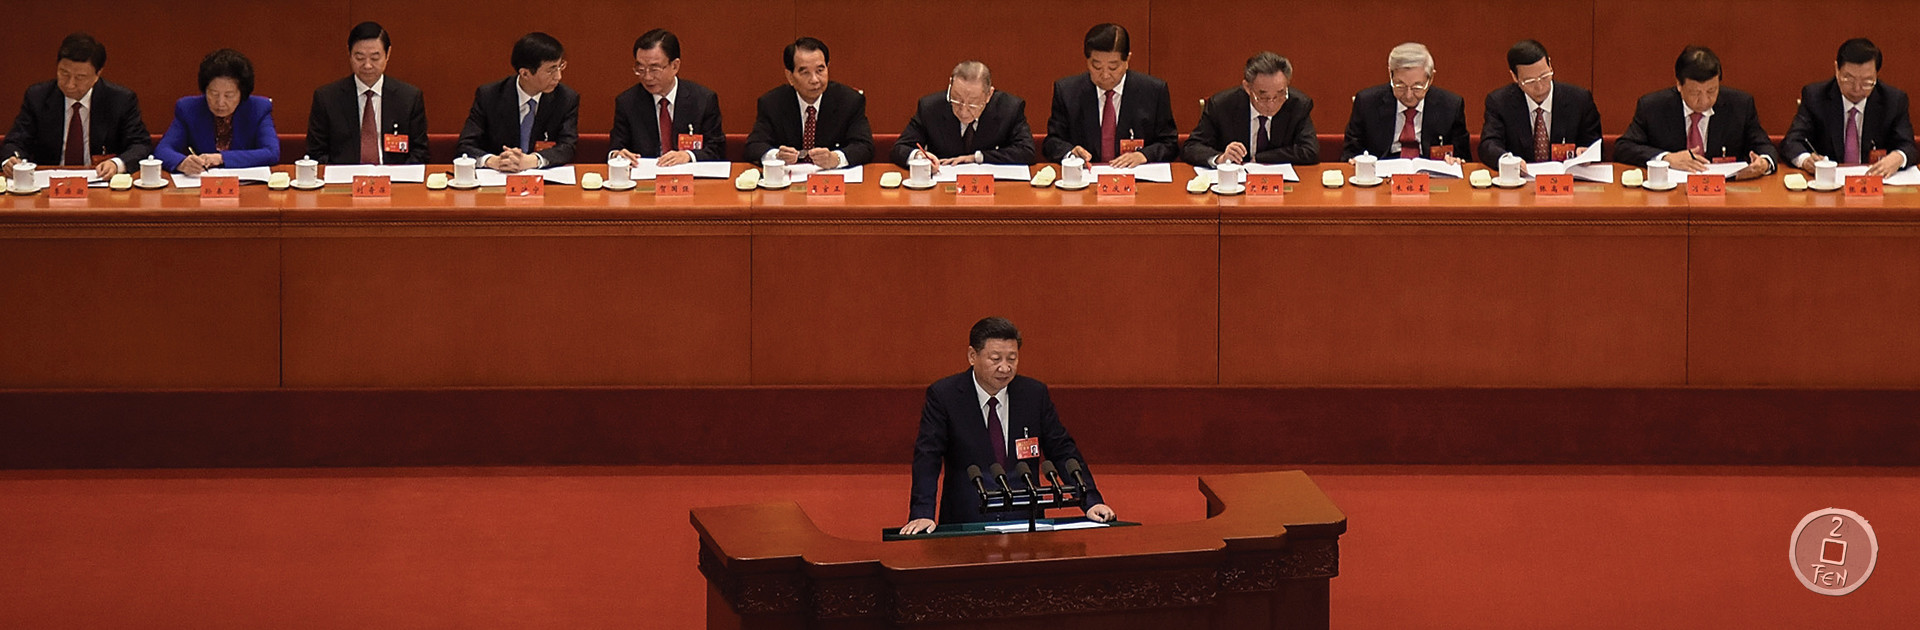 Hidden Gems in Xi Jinping’s Address to the Party Congress